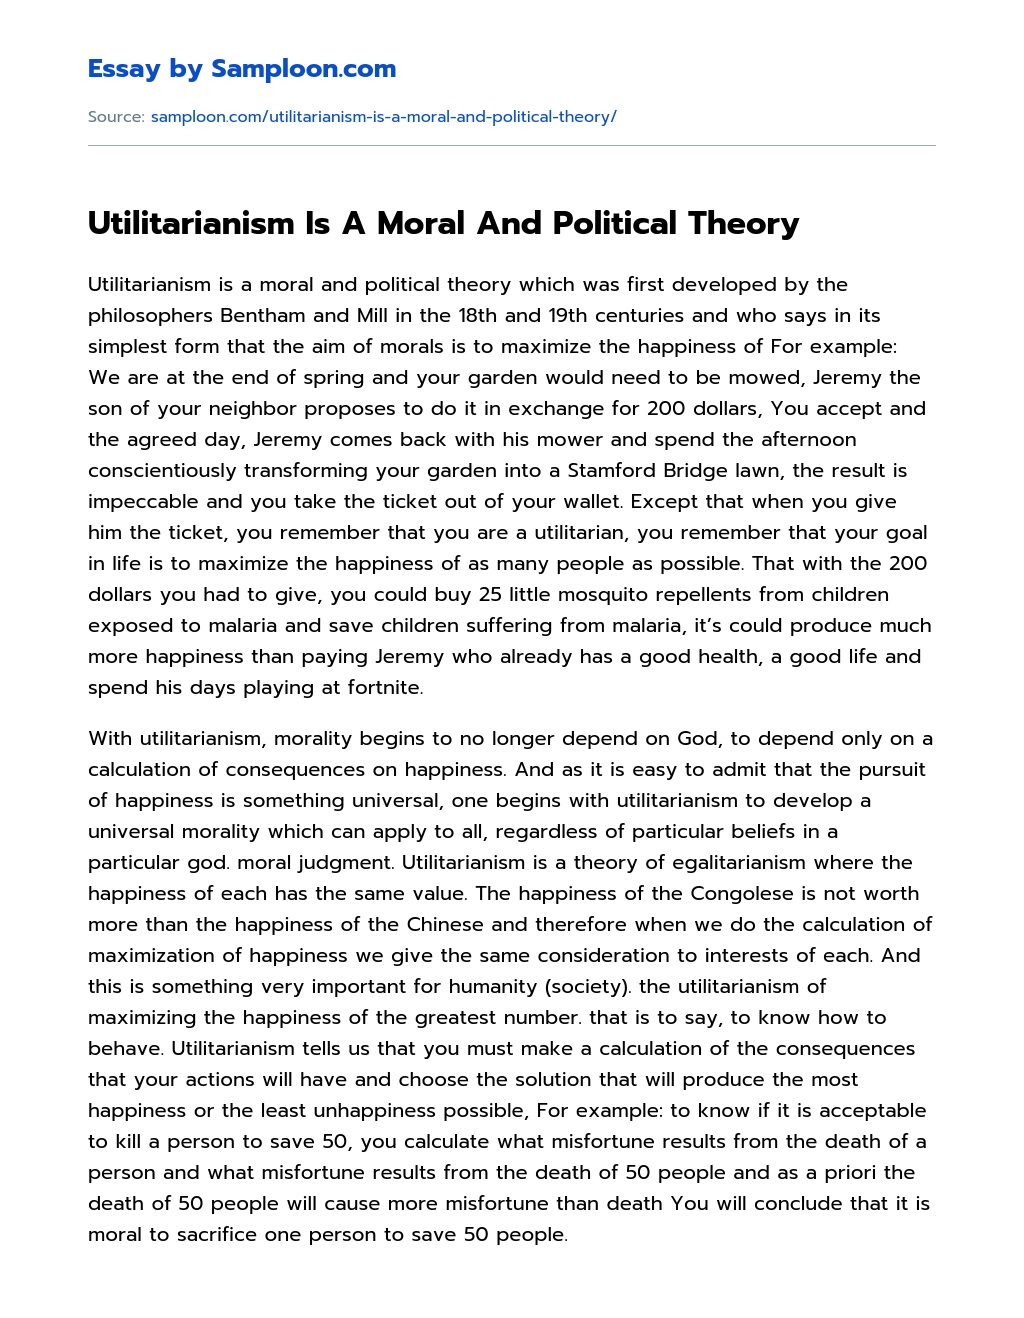 Utilitarianism Is A Moral And Political Theory essay